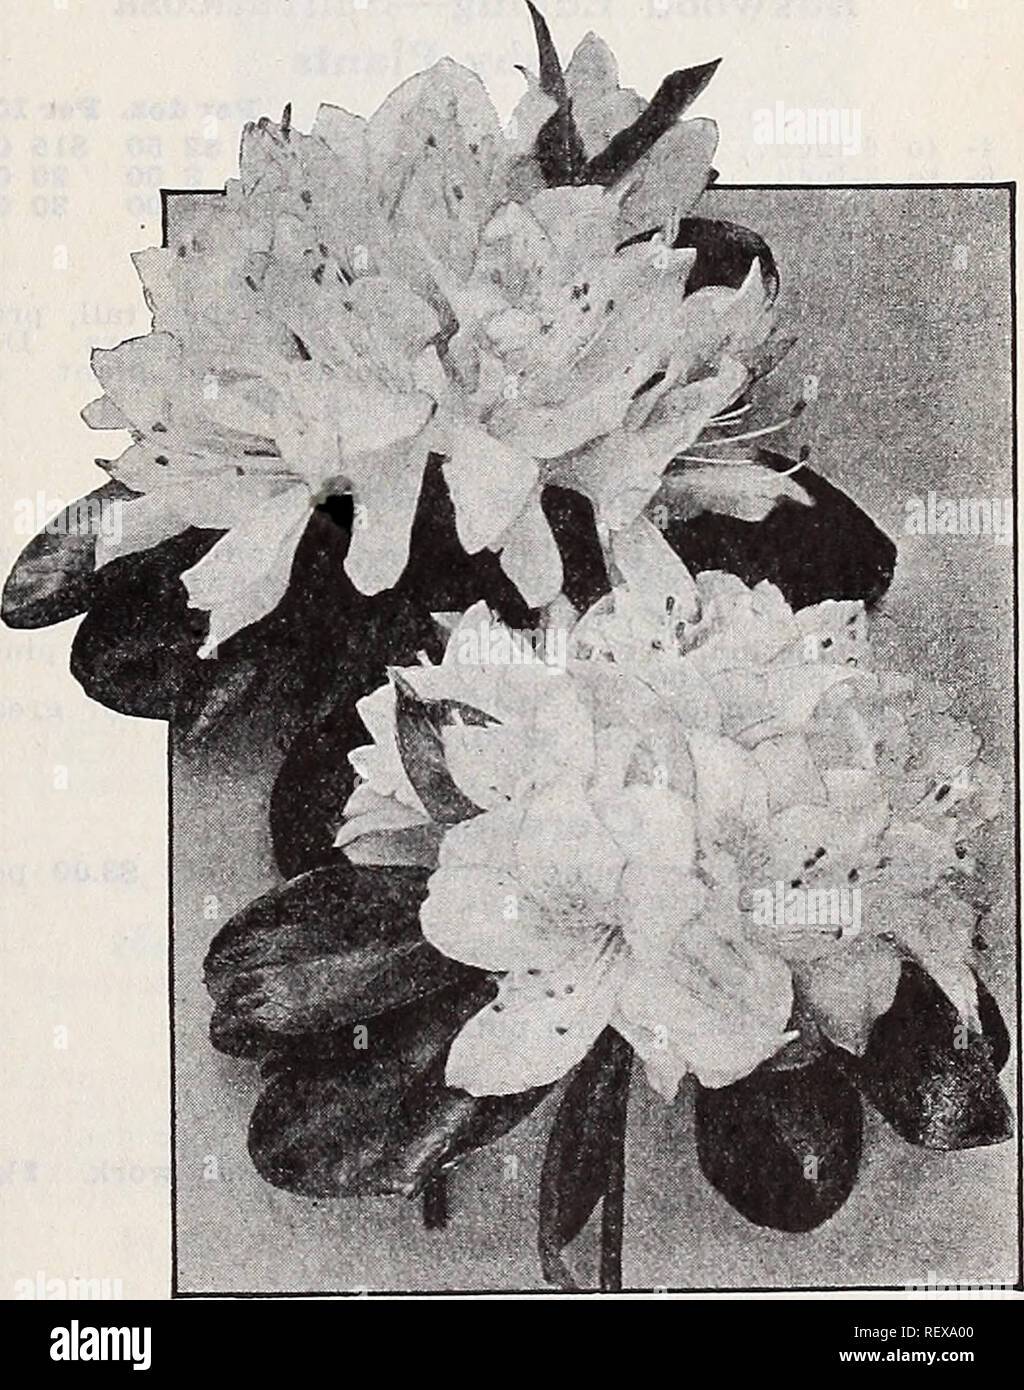 . Dreer's wholesale catalog for florists and market gardeners : 1939 winter spring summer. Bulbs (Plants) Catalogs; Vegetables Seeds Catalogs; Flowers Seeds Catalogs; Nurseries (Horticulture) Catalogs; Gardening Equipment and supplies Catalogs. Agapanthus umbellatus Agapanthus Umbellatus. Strong plants in 6-inch pots. 75c each. Strong plants in 8-inch tubs, $2.50 each. Aglaonema Modestum (Chinese Evergreen). Showy rich green leaves. A choice house plant that may be grown in soil or in bowls filled with water. 2%-inch pots $2.00 $io.OOÂ°per 10'0Â°Â° ^ 10Â°' 3&quot;inÂ°h PÂ°tS' $3,Â°Â° per ^0Z-; Stock Photo